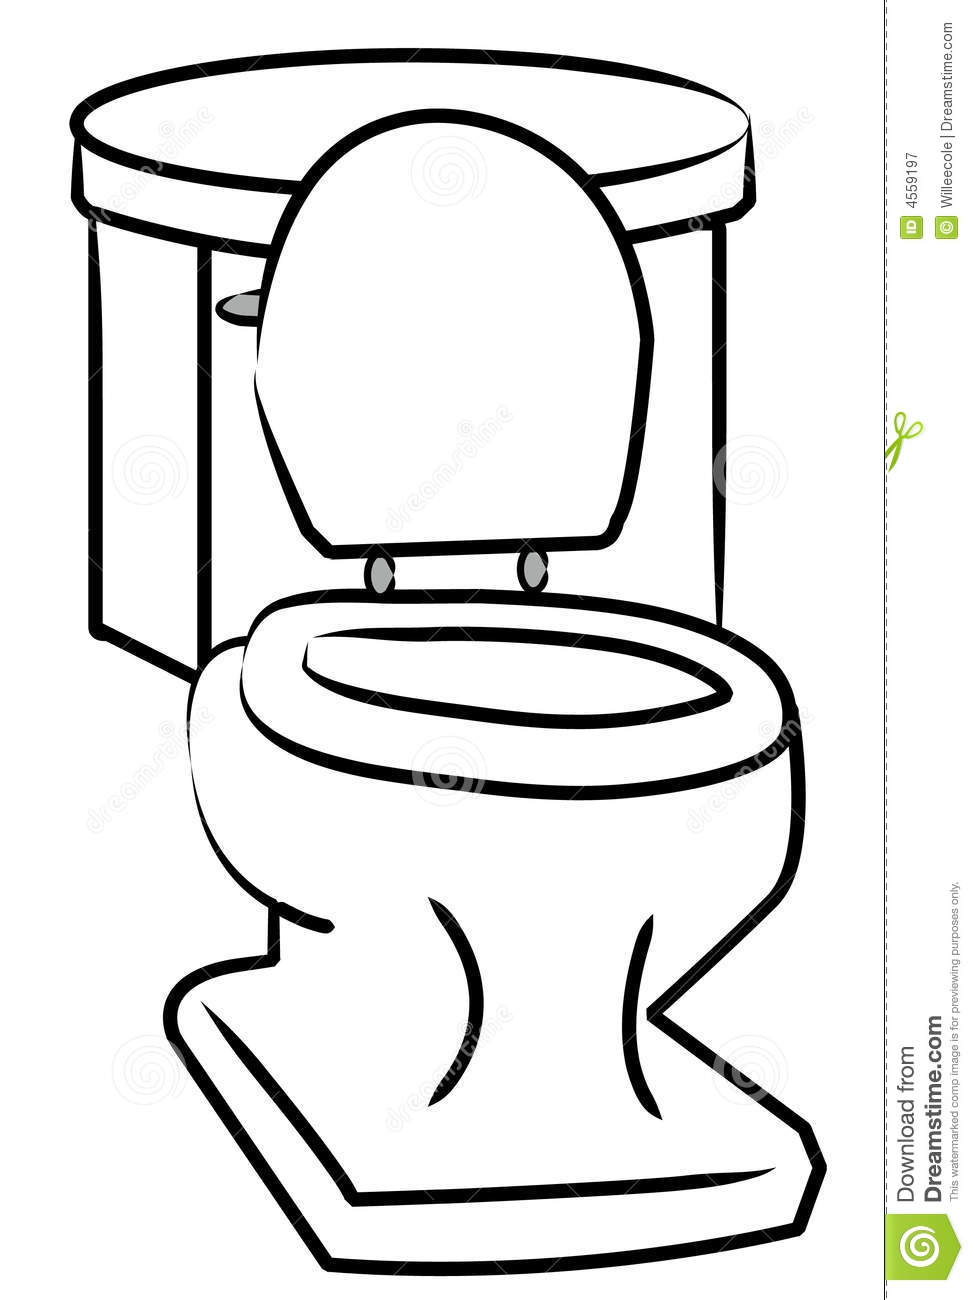 Toilet With Seat Up Royalty Free Stock Photography   Image  4559197